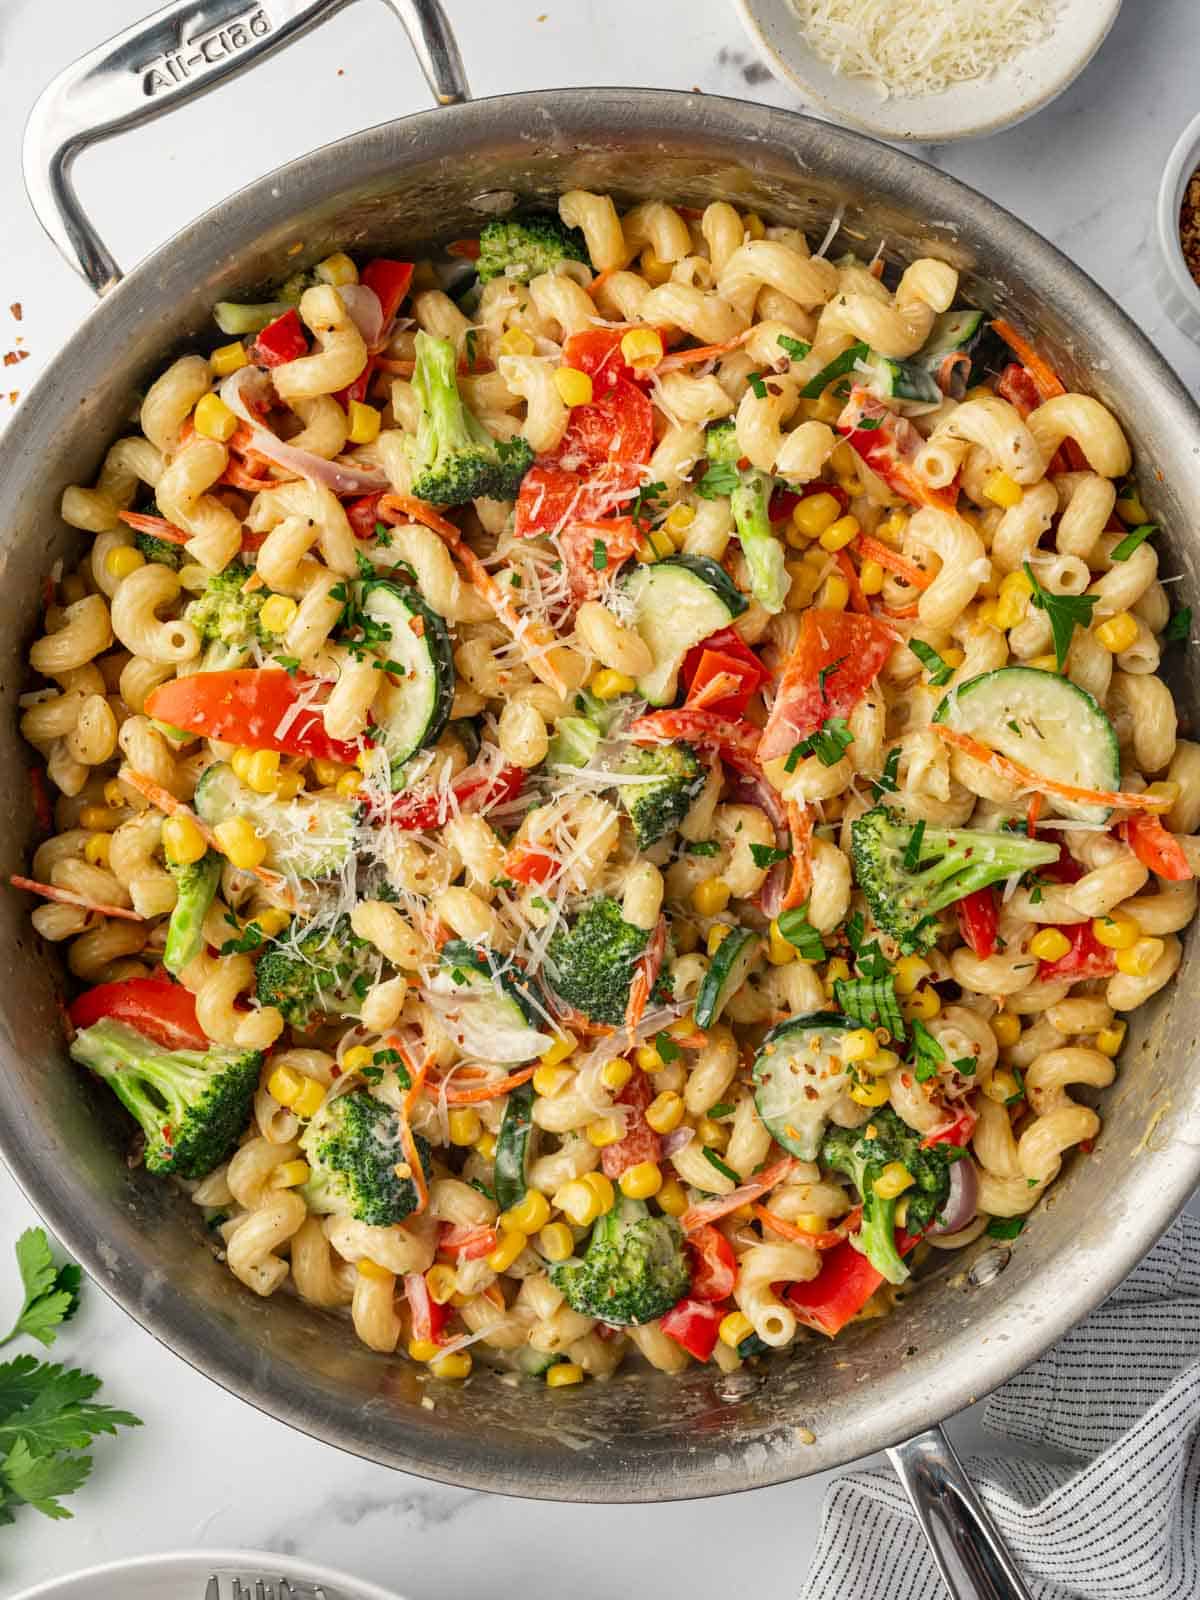 Parmasan cheese is sprinkled over veggies and pasta.